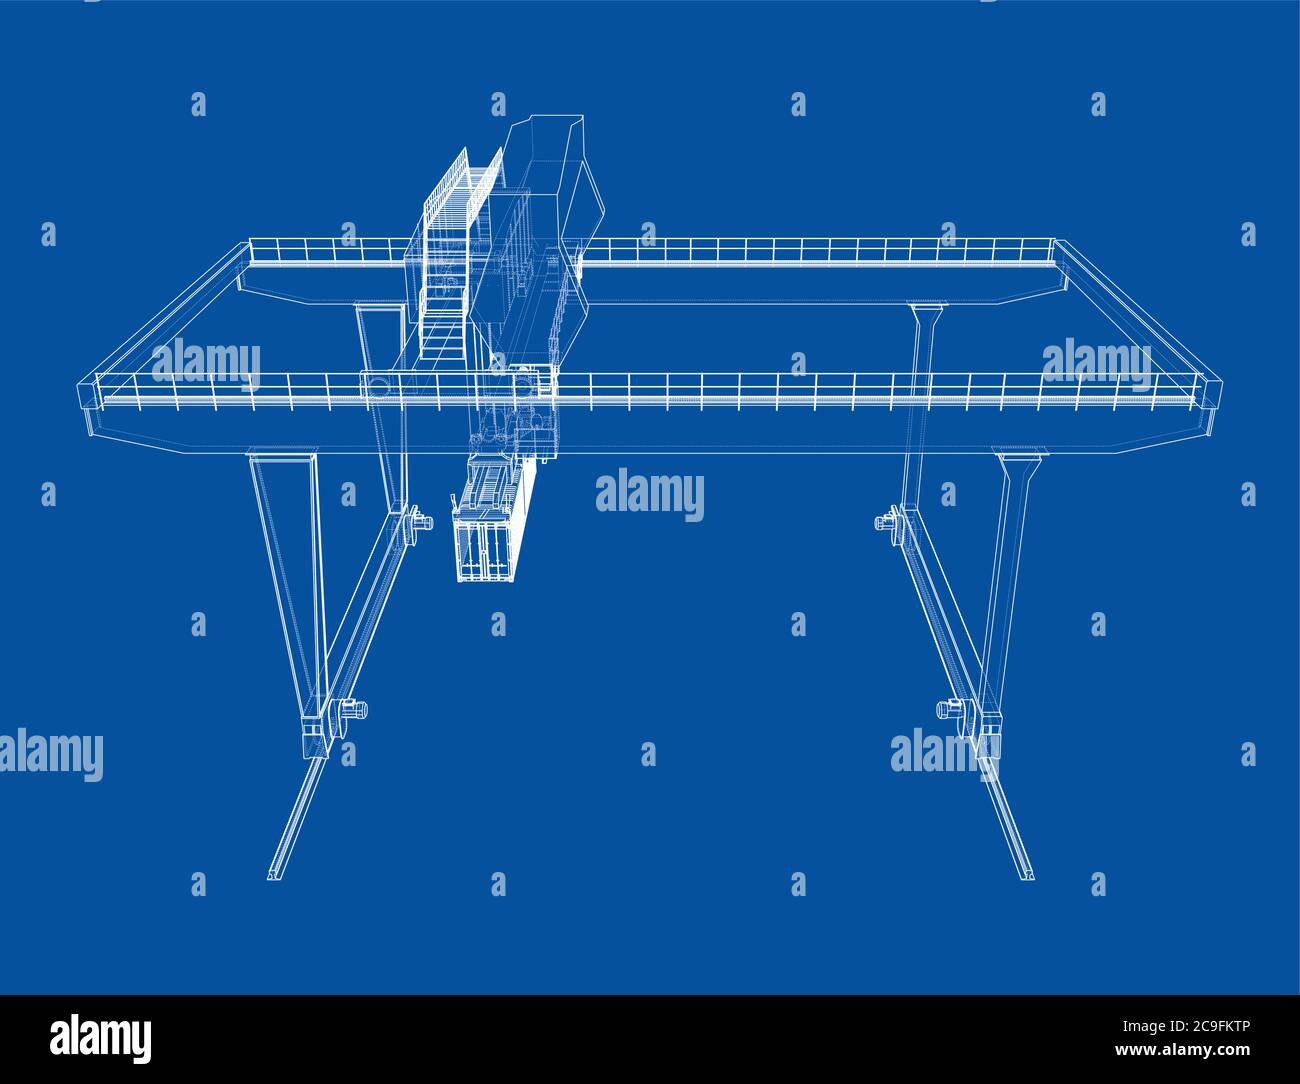 Rail-mounted gantry container crane outline Stock Vector